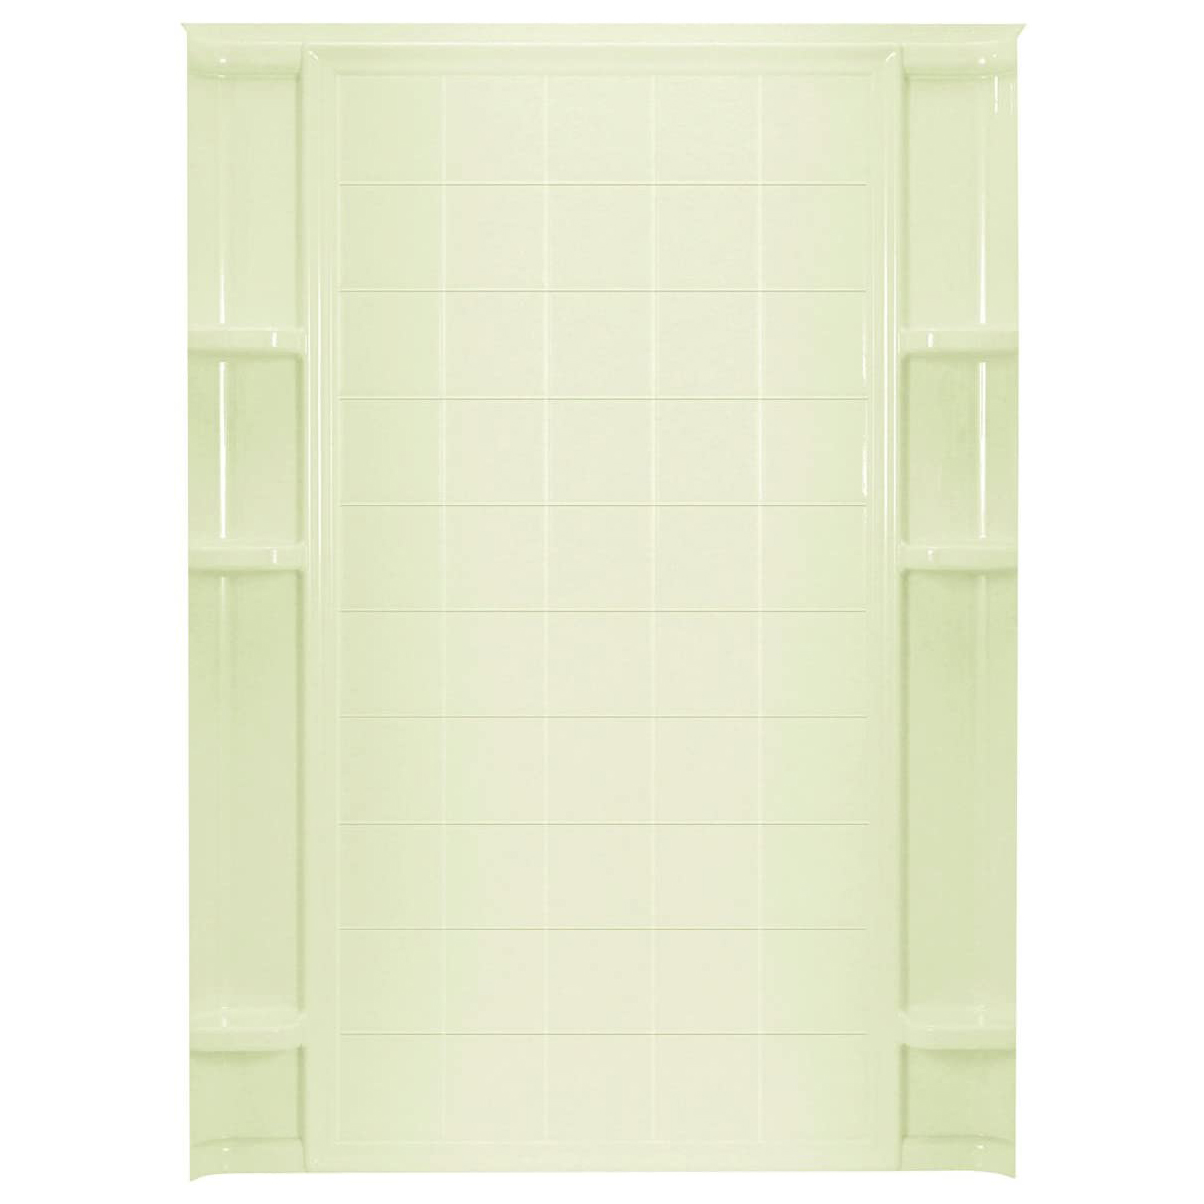 BACK WALL 60 BIS TILE 72132100-96 ALCOVE